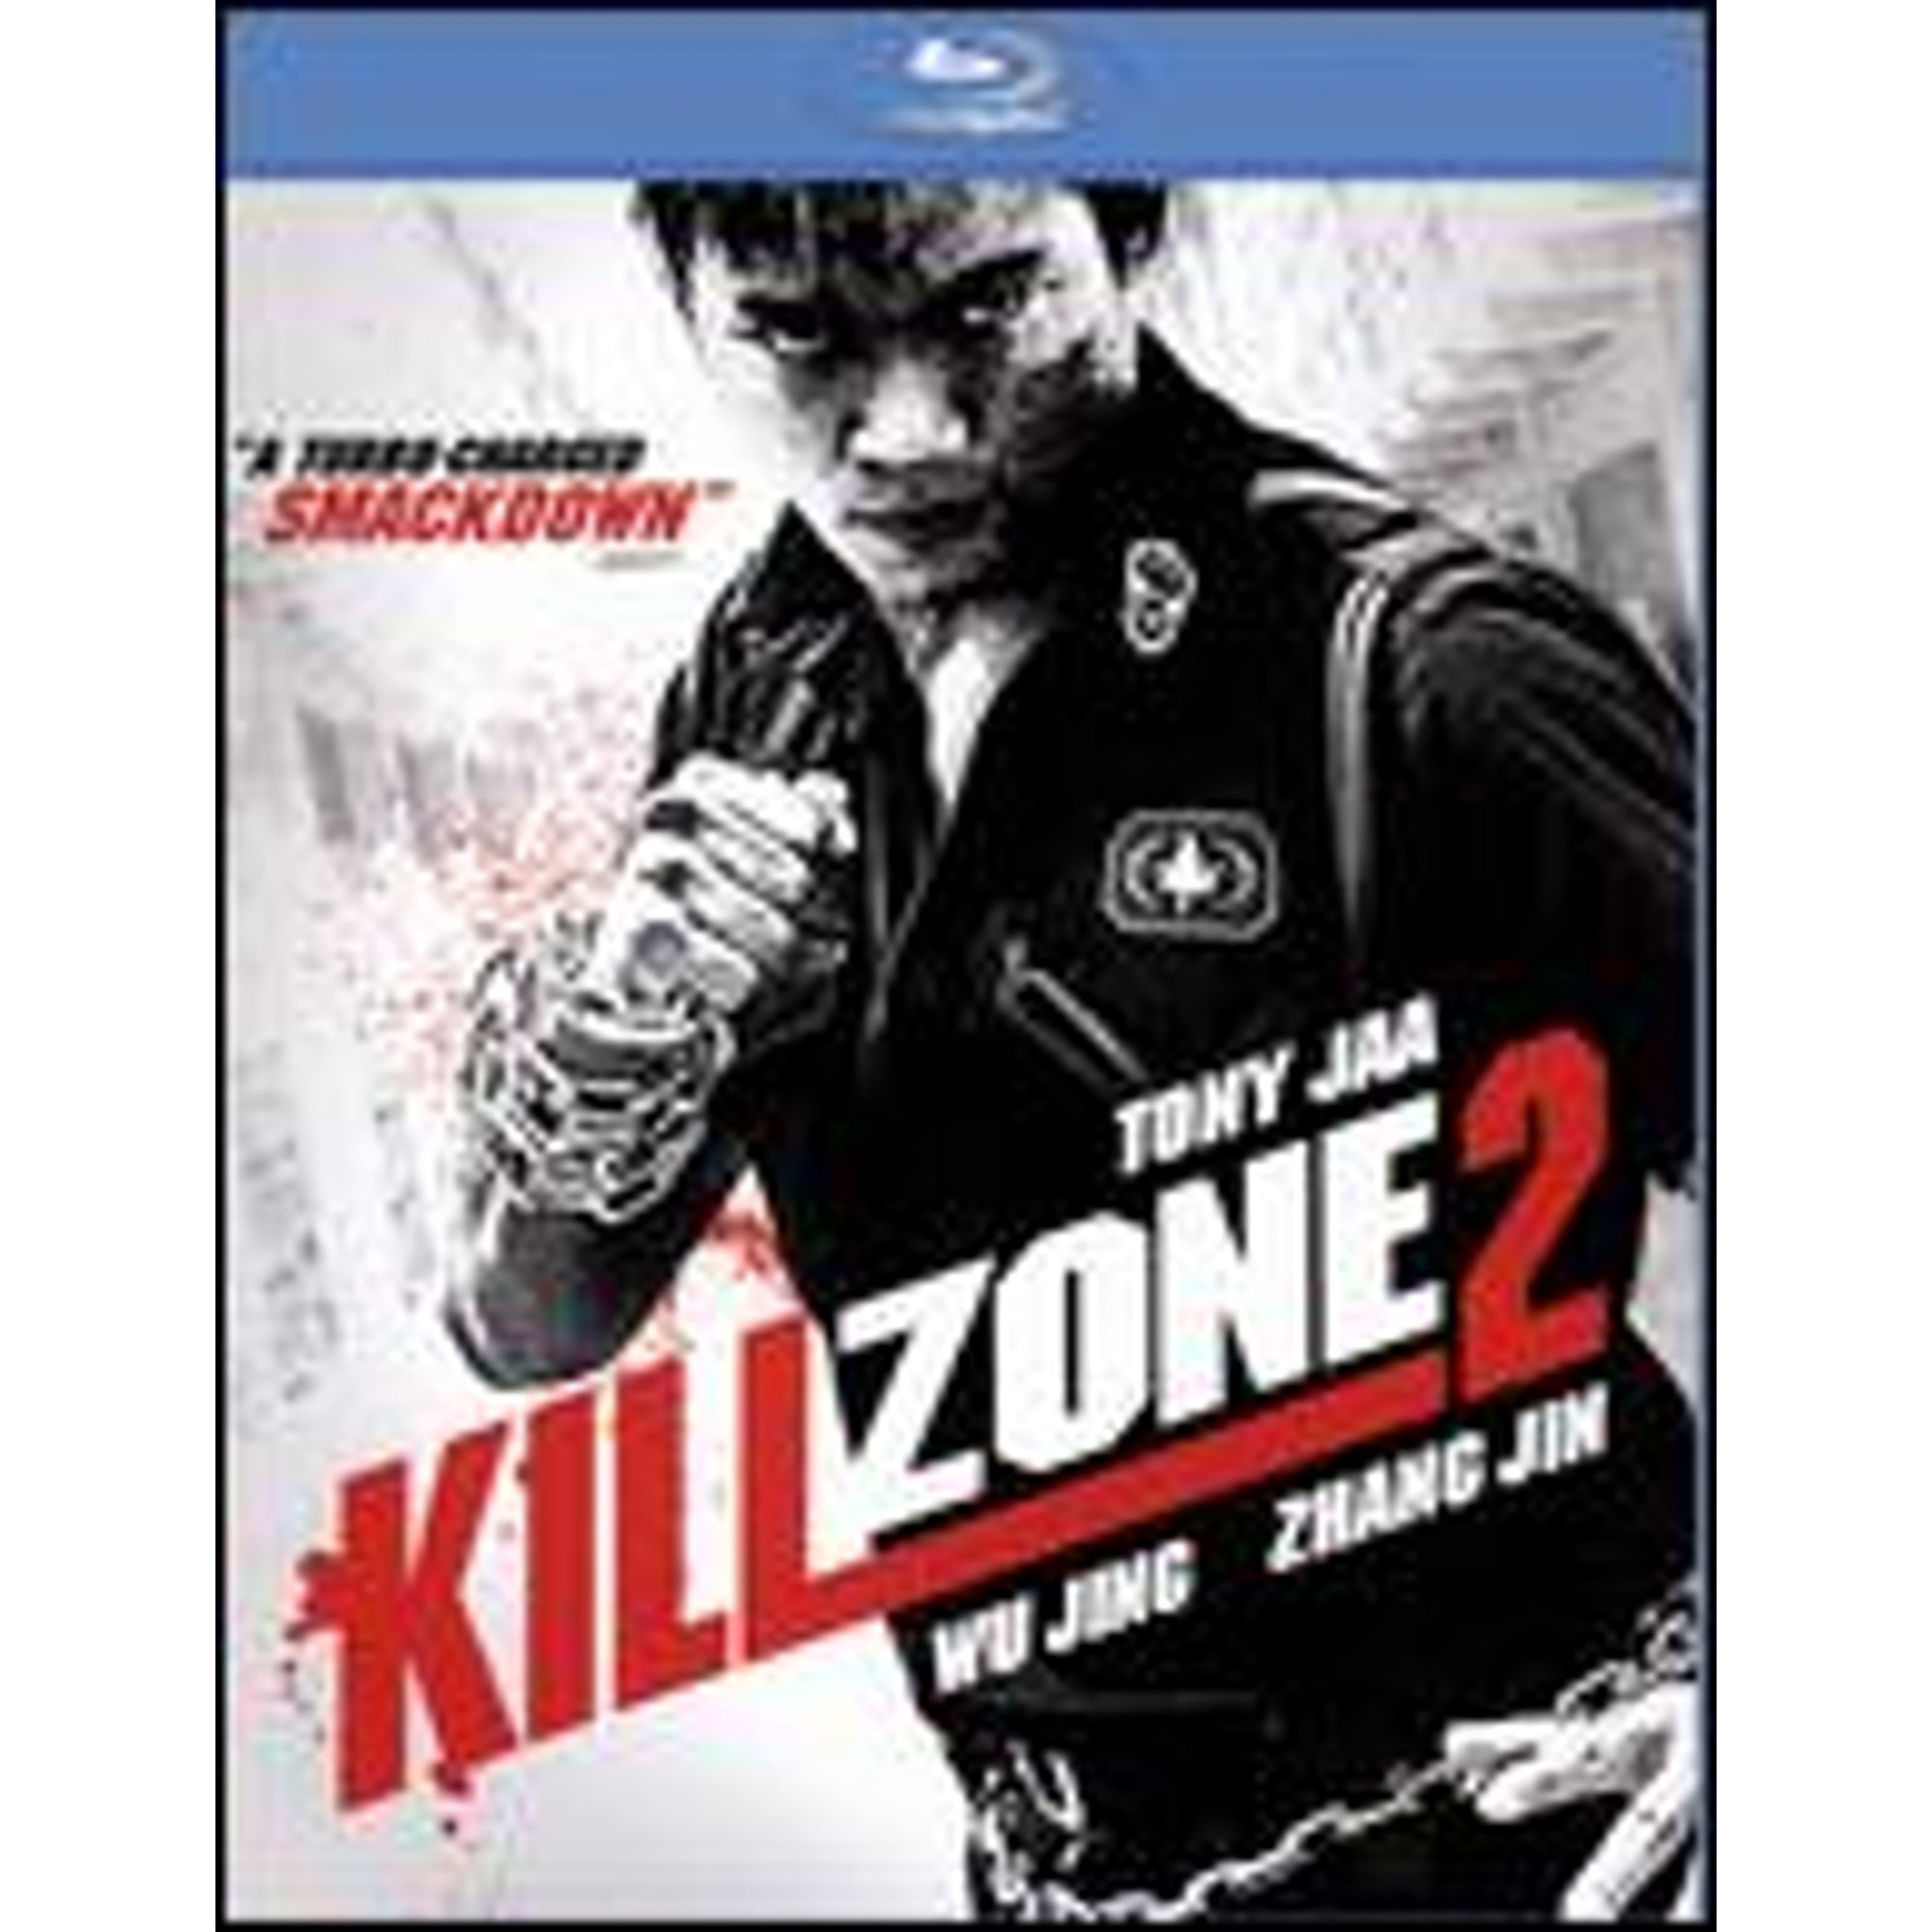 Pre-Owned Kill Zone 2 [Blu-ray] (Blu-Ray 0812491016909) directed by Pou-soi  Cheang